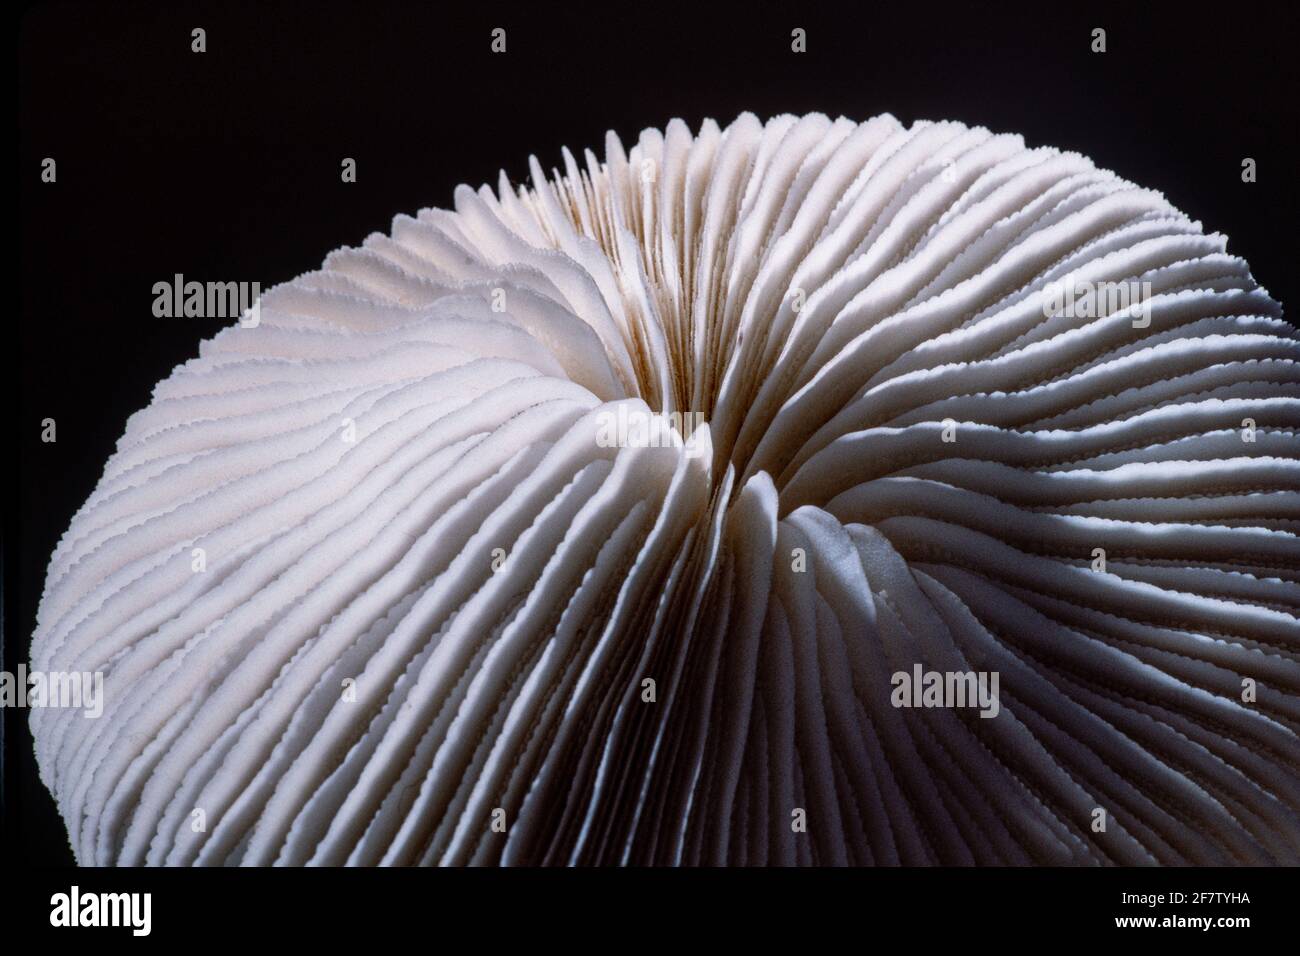 Close-up image to show the structure of this hard disk coral exoskeleton from the Caribbean Sea at Belize. Stock Photo